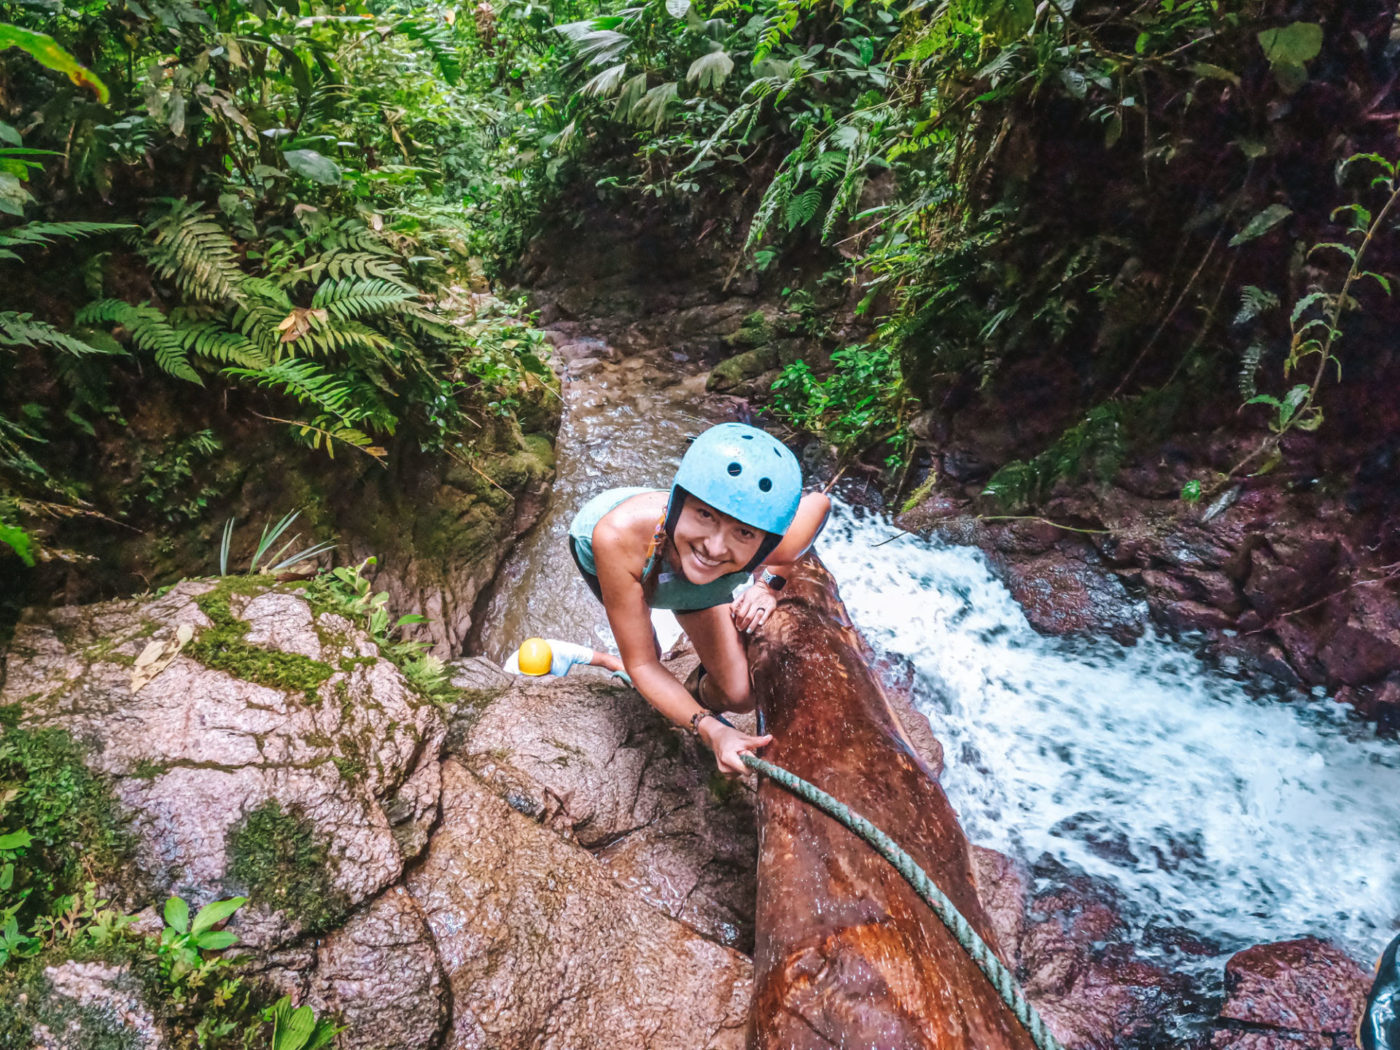 Canyoning in the Amazon